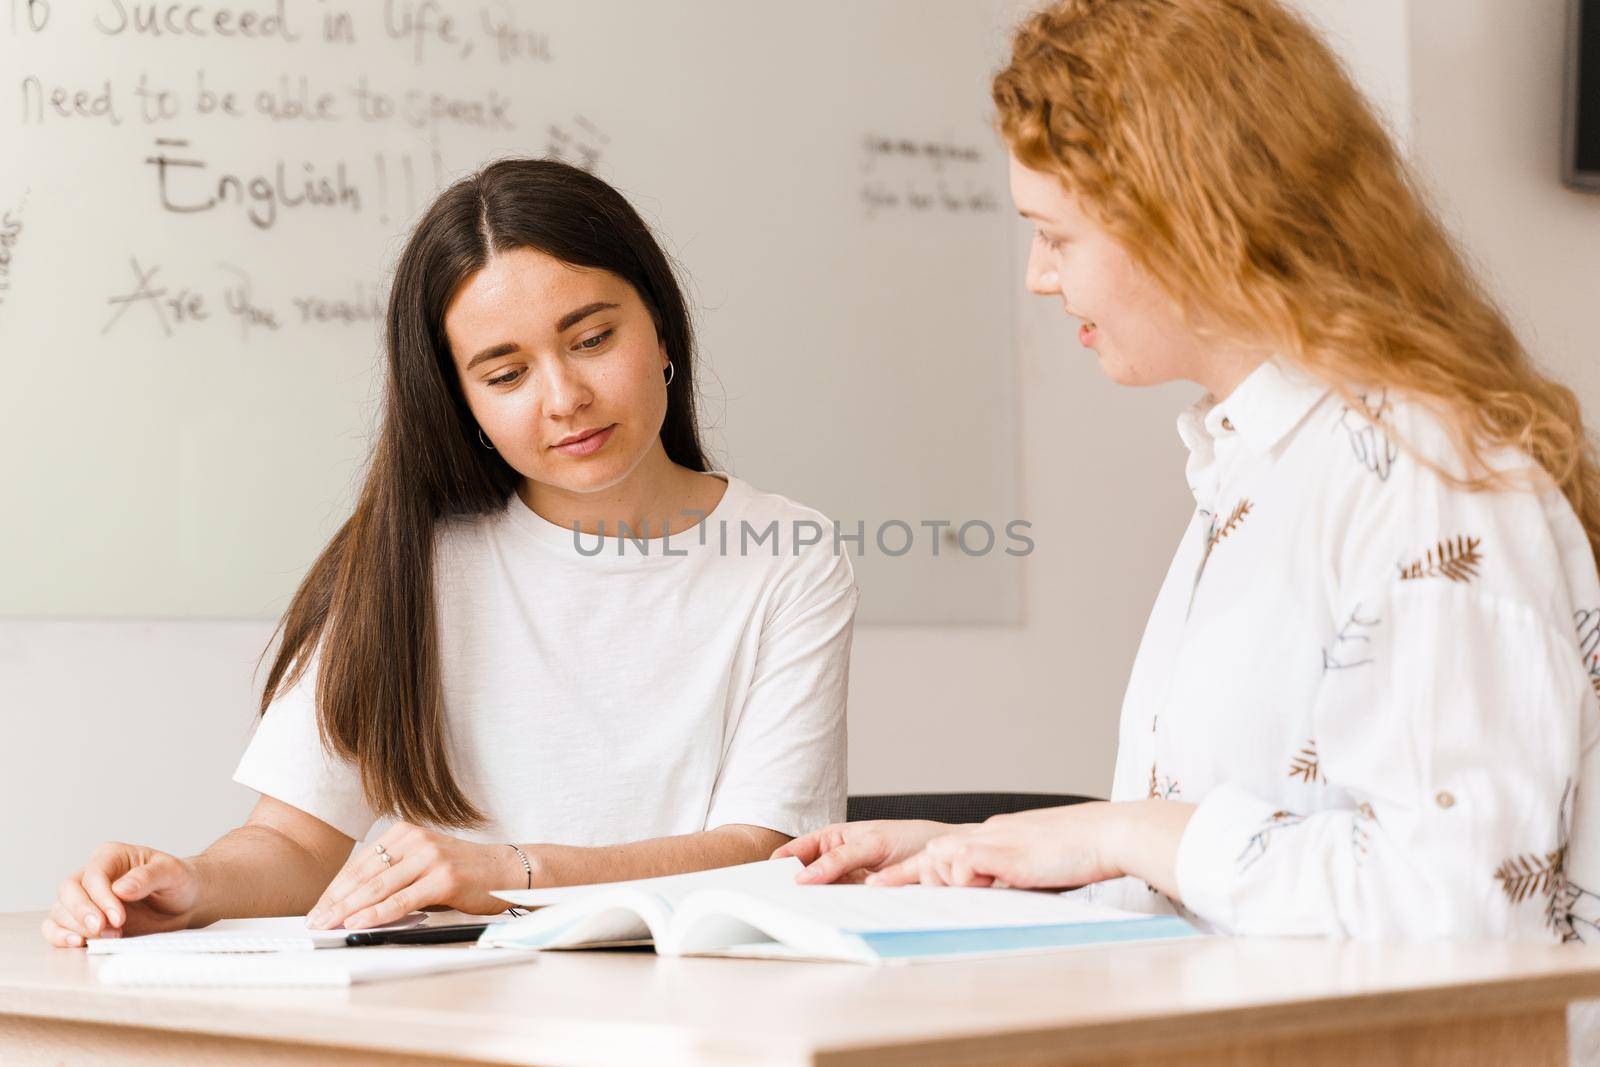 Teacher of english asks student in white class. 2 girls student answers to teacher. Working in group. Study english and british language.